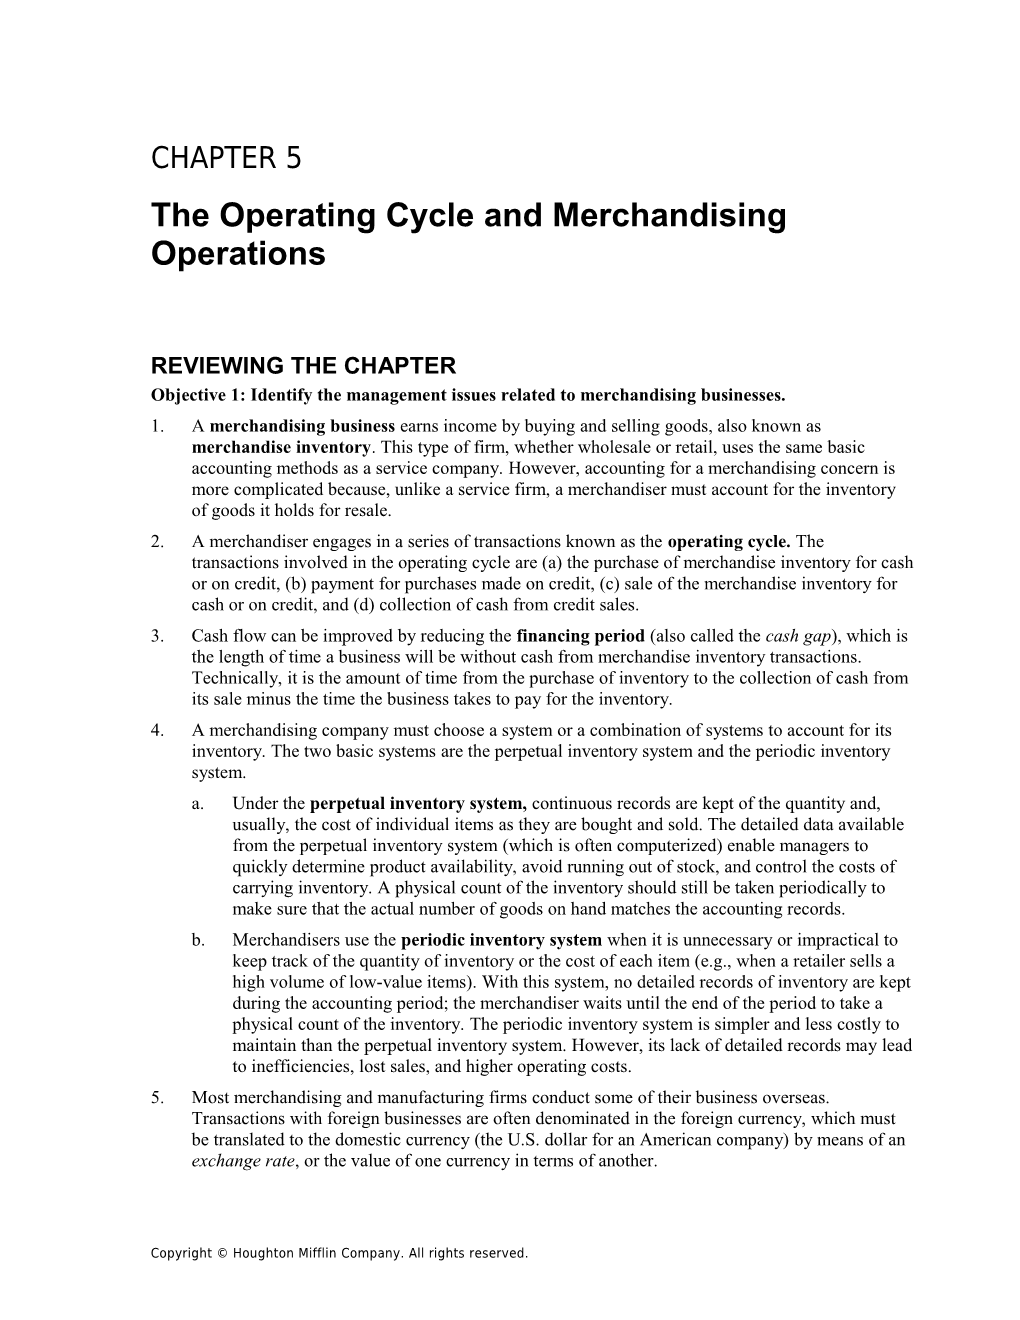 Chapter 5: the Operating Cycle and Merchandising Operations 1